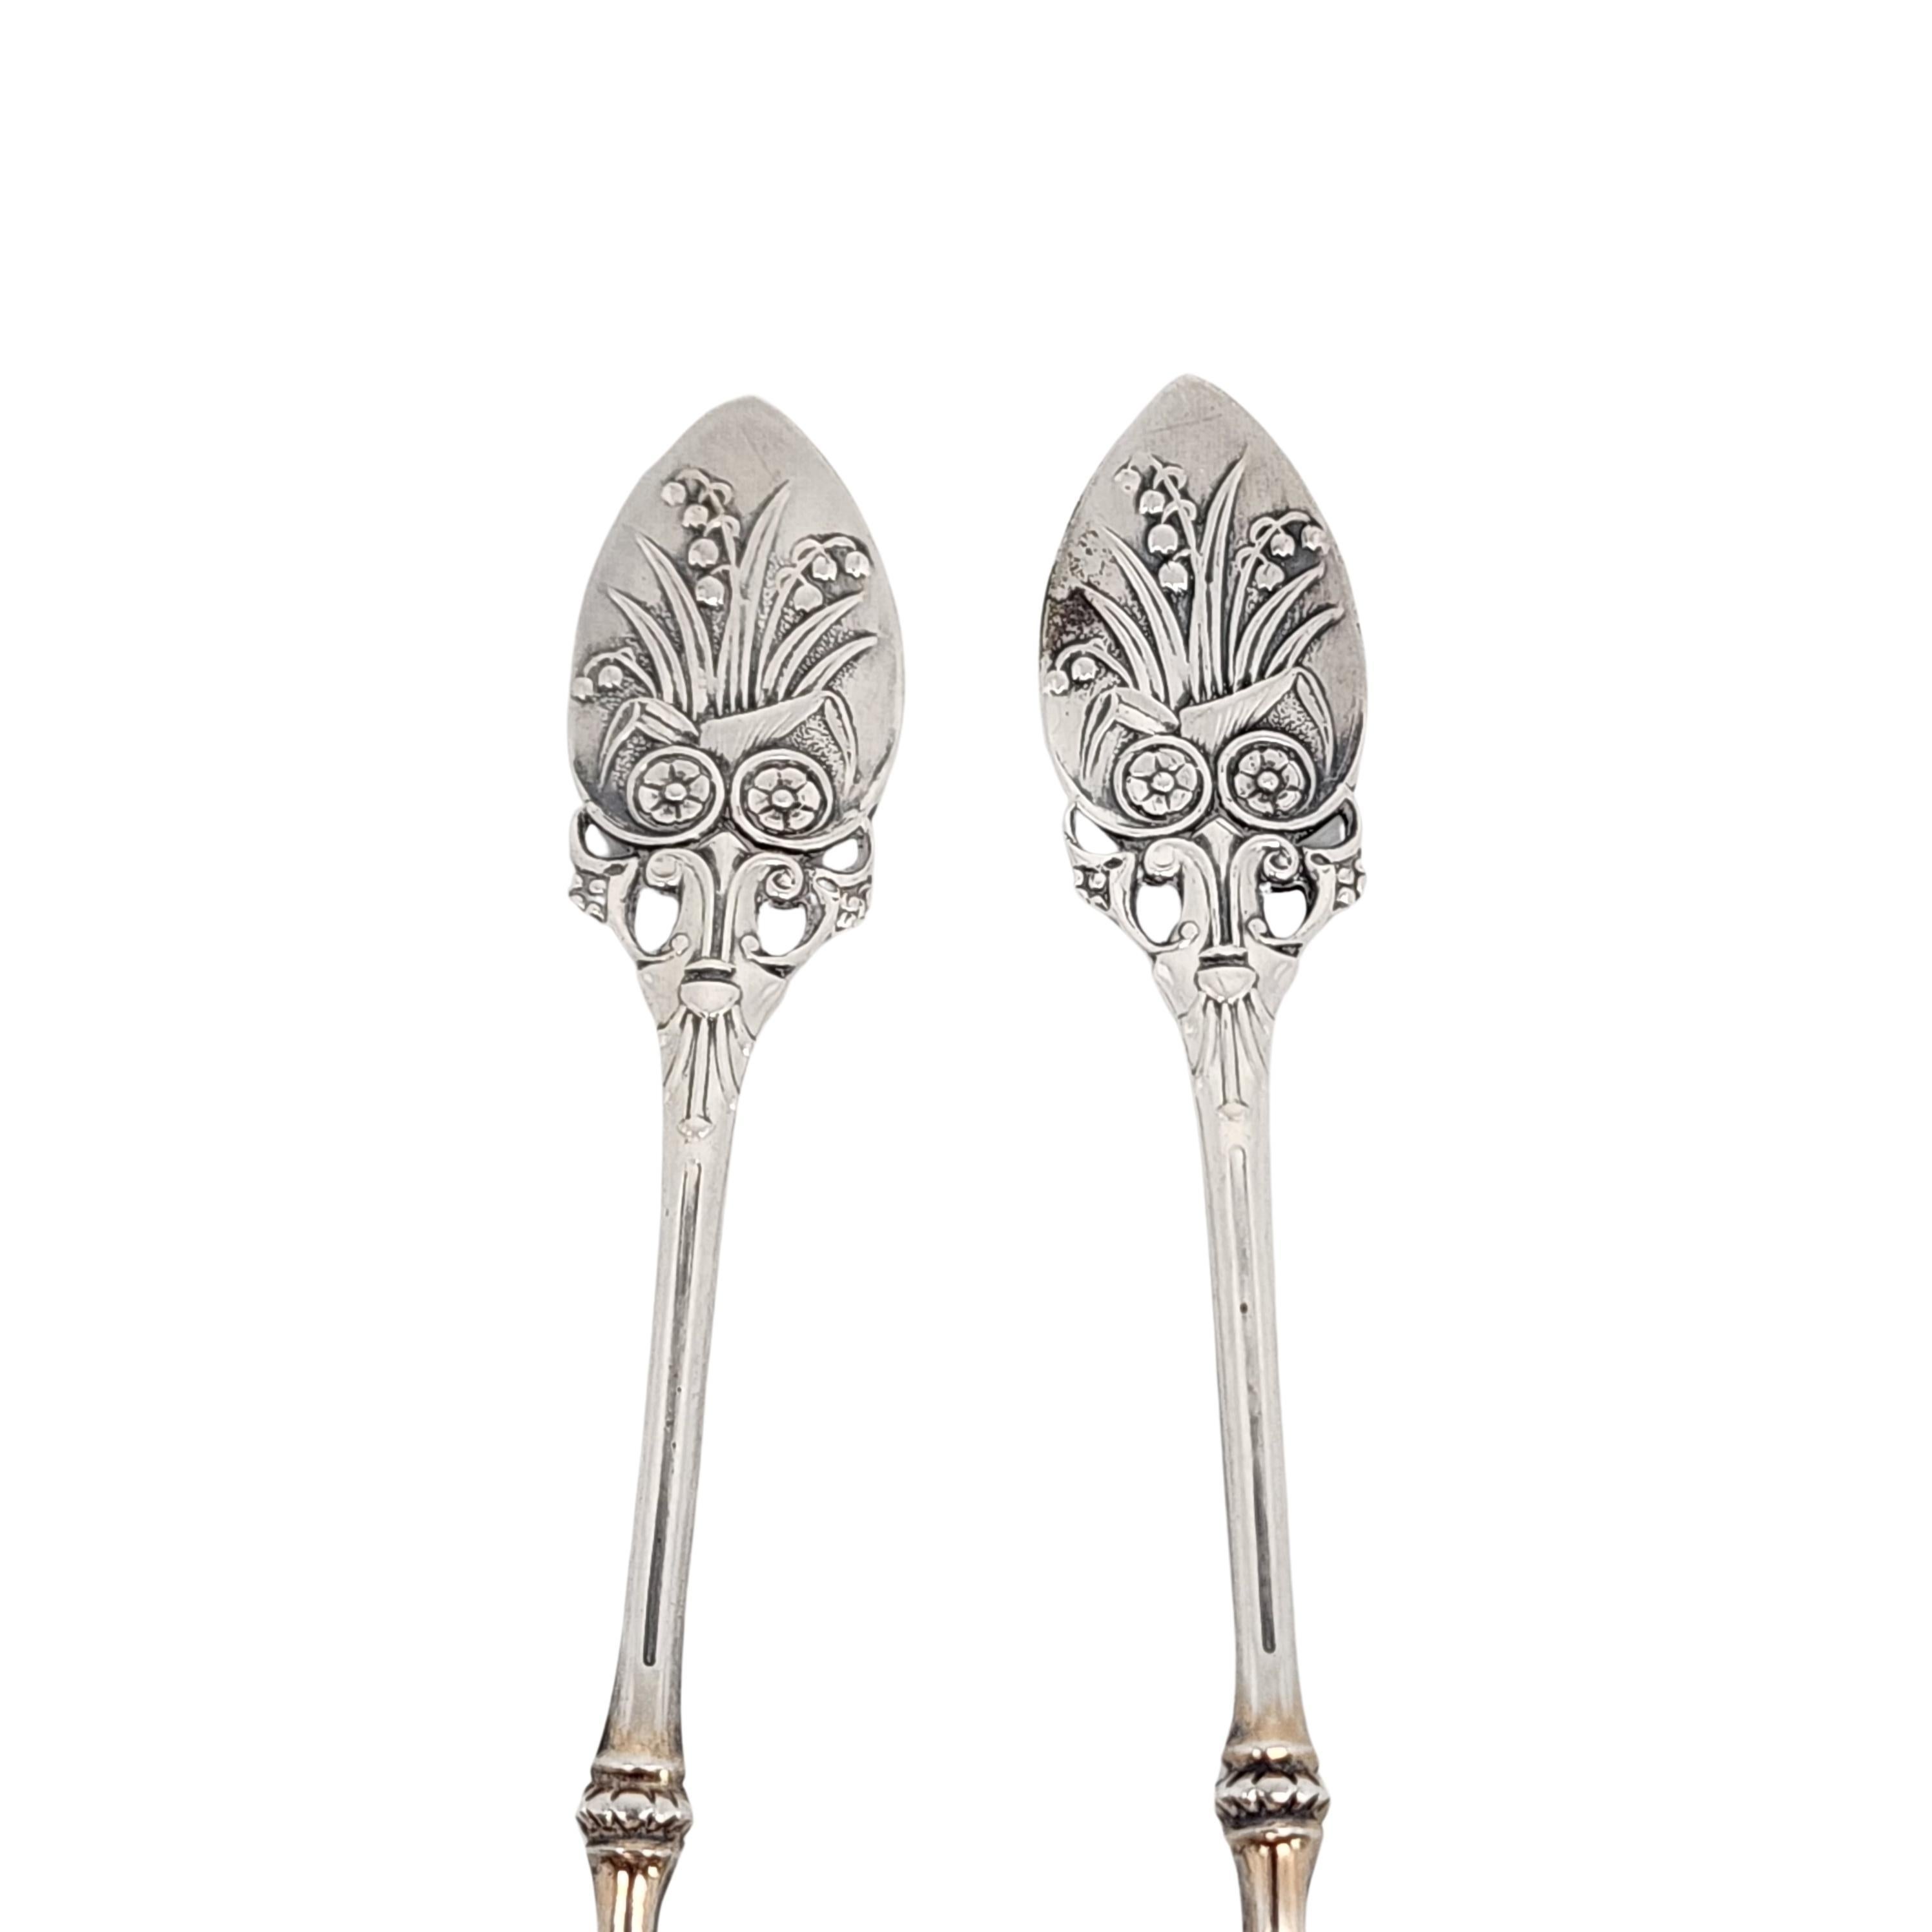 Set of 2 Gorham Sterling Silver Lily 1870 Gold Wash Bowl Demitasse Spoons #15826 In Good Condition For Sale In Washington Depot, CT